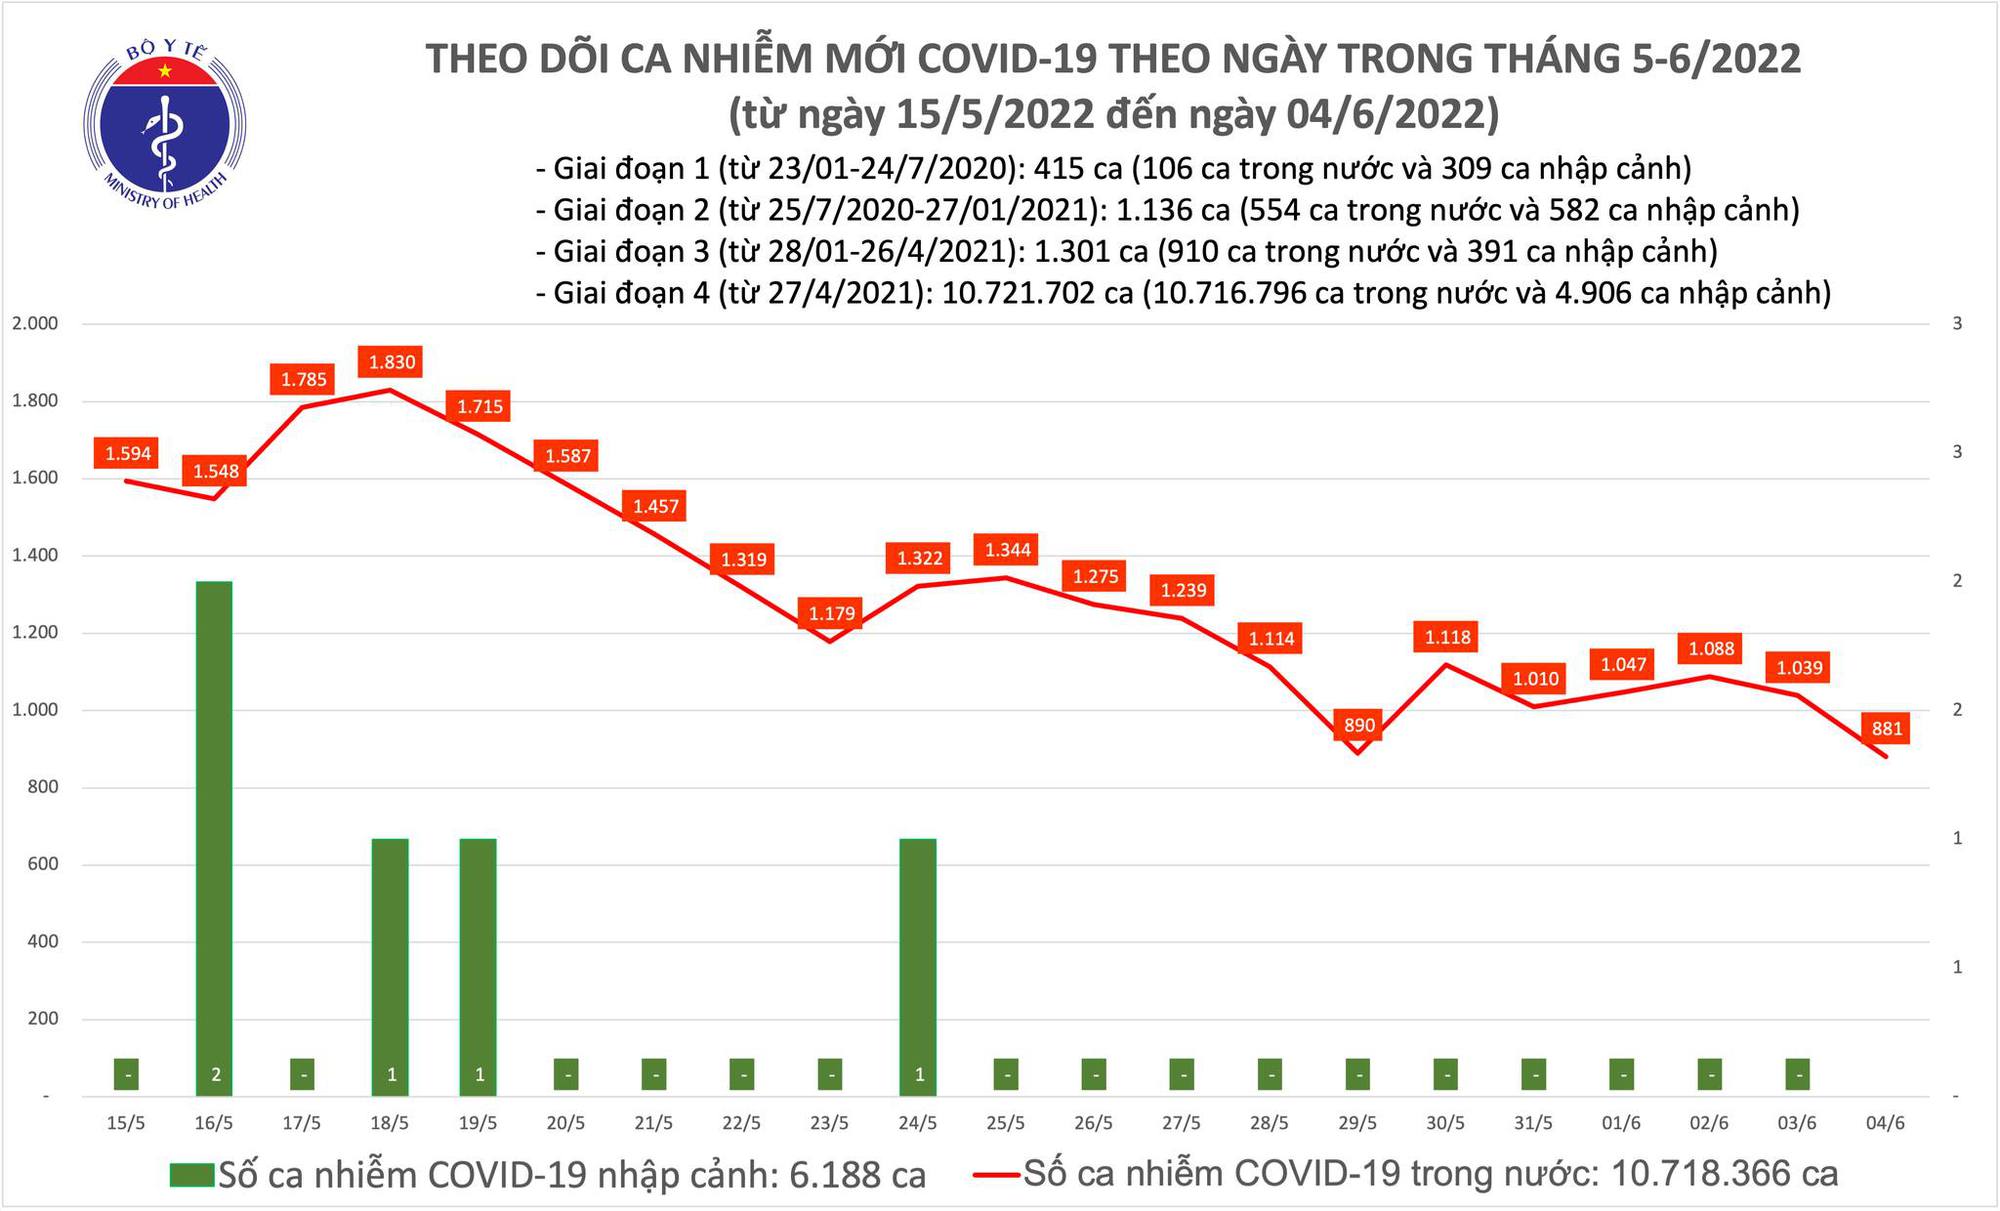 June 4: The lowest number of new Covid-19 cases in nearly a year - Photo 1.